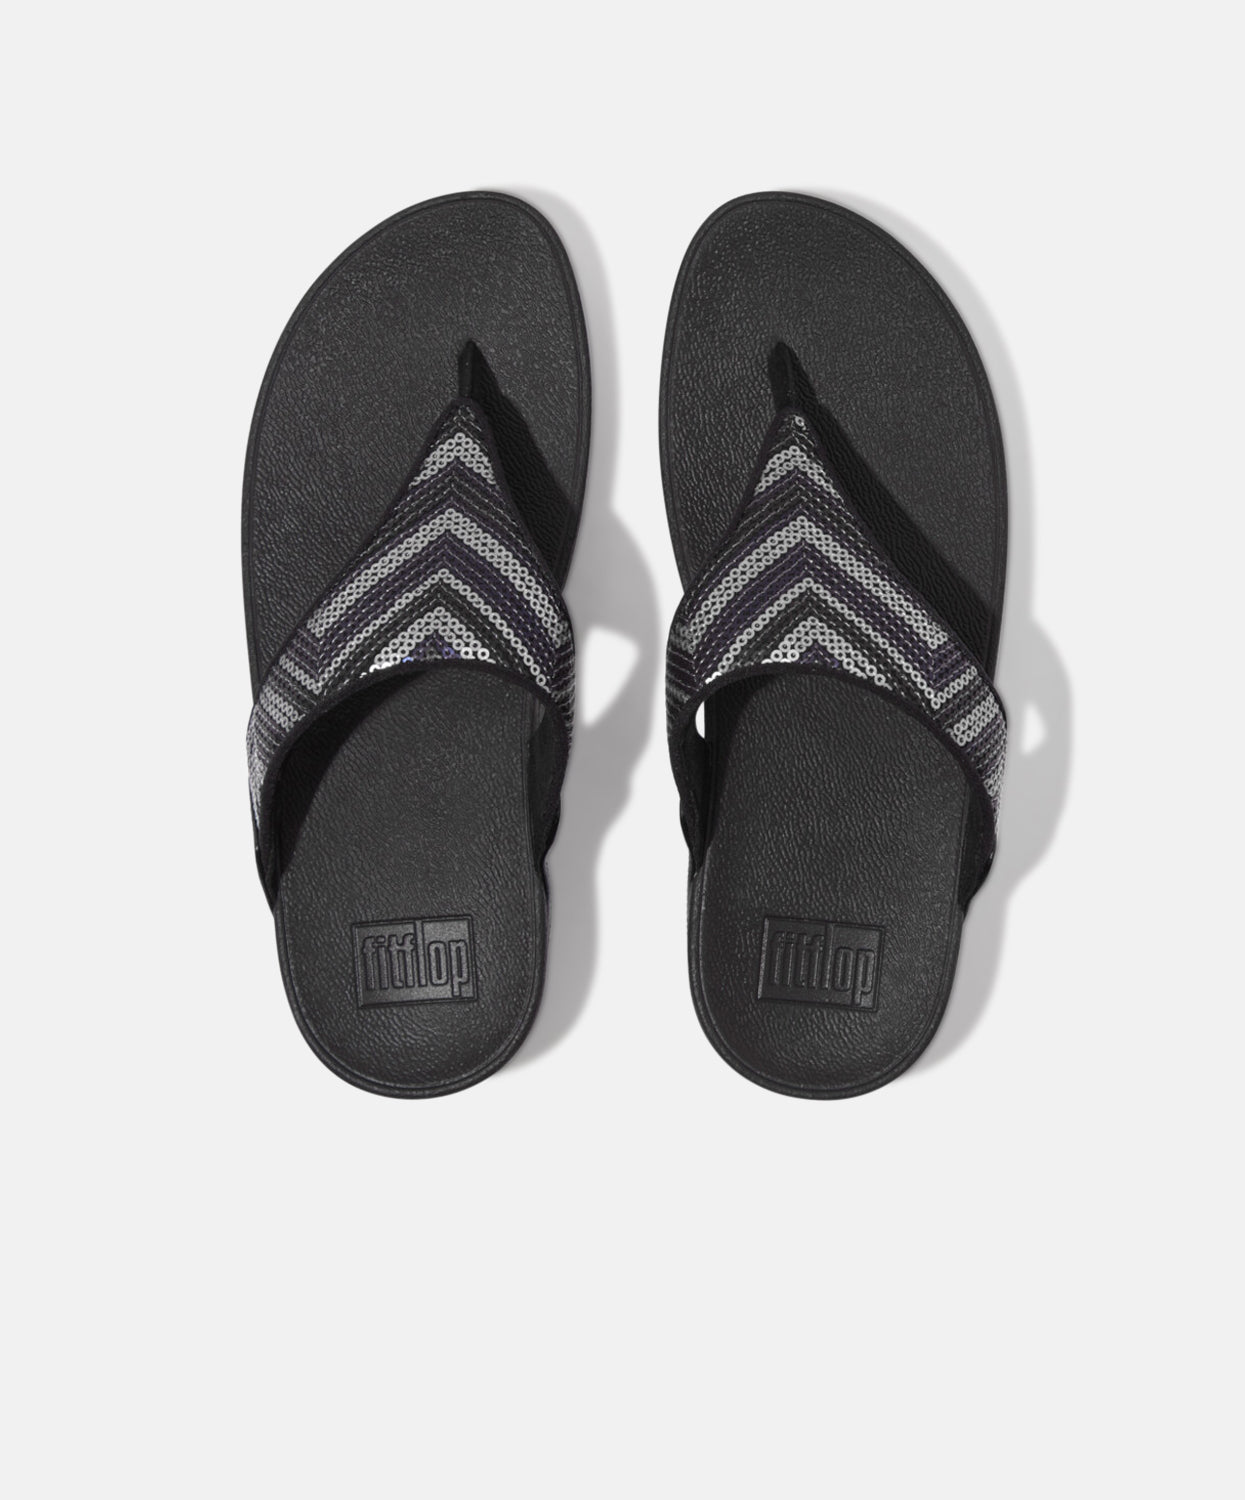 FitFlop Lulu Sequin ZigZag Black Shipping Sandal Bstore – Toe-post Orders Over Express $120 | Free